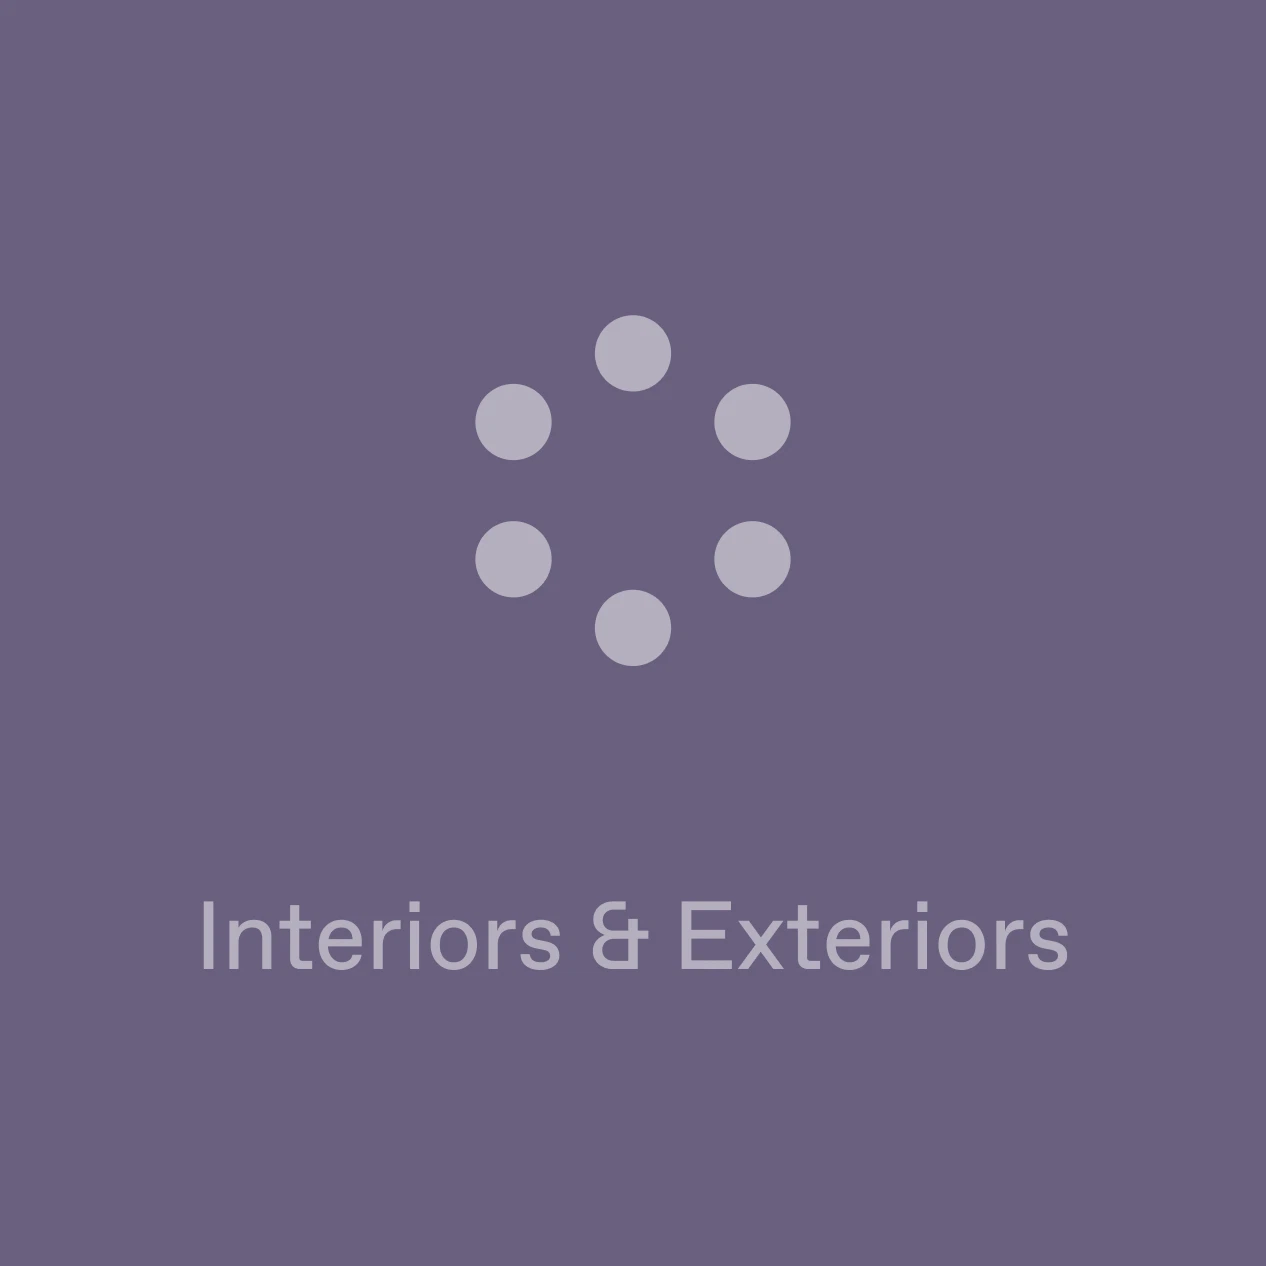 A cover of "Interiors & Exteriors" cluster. The owner is crzenna. The cluster consists of 31 elements.